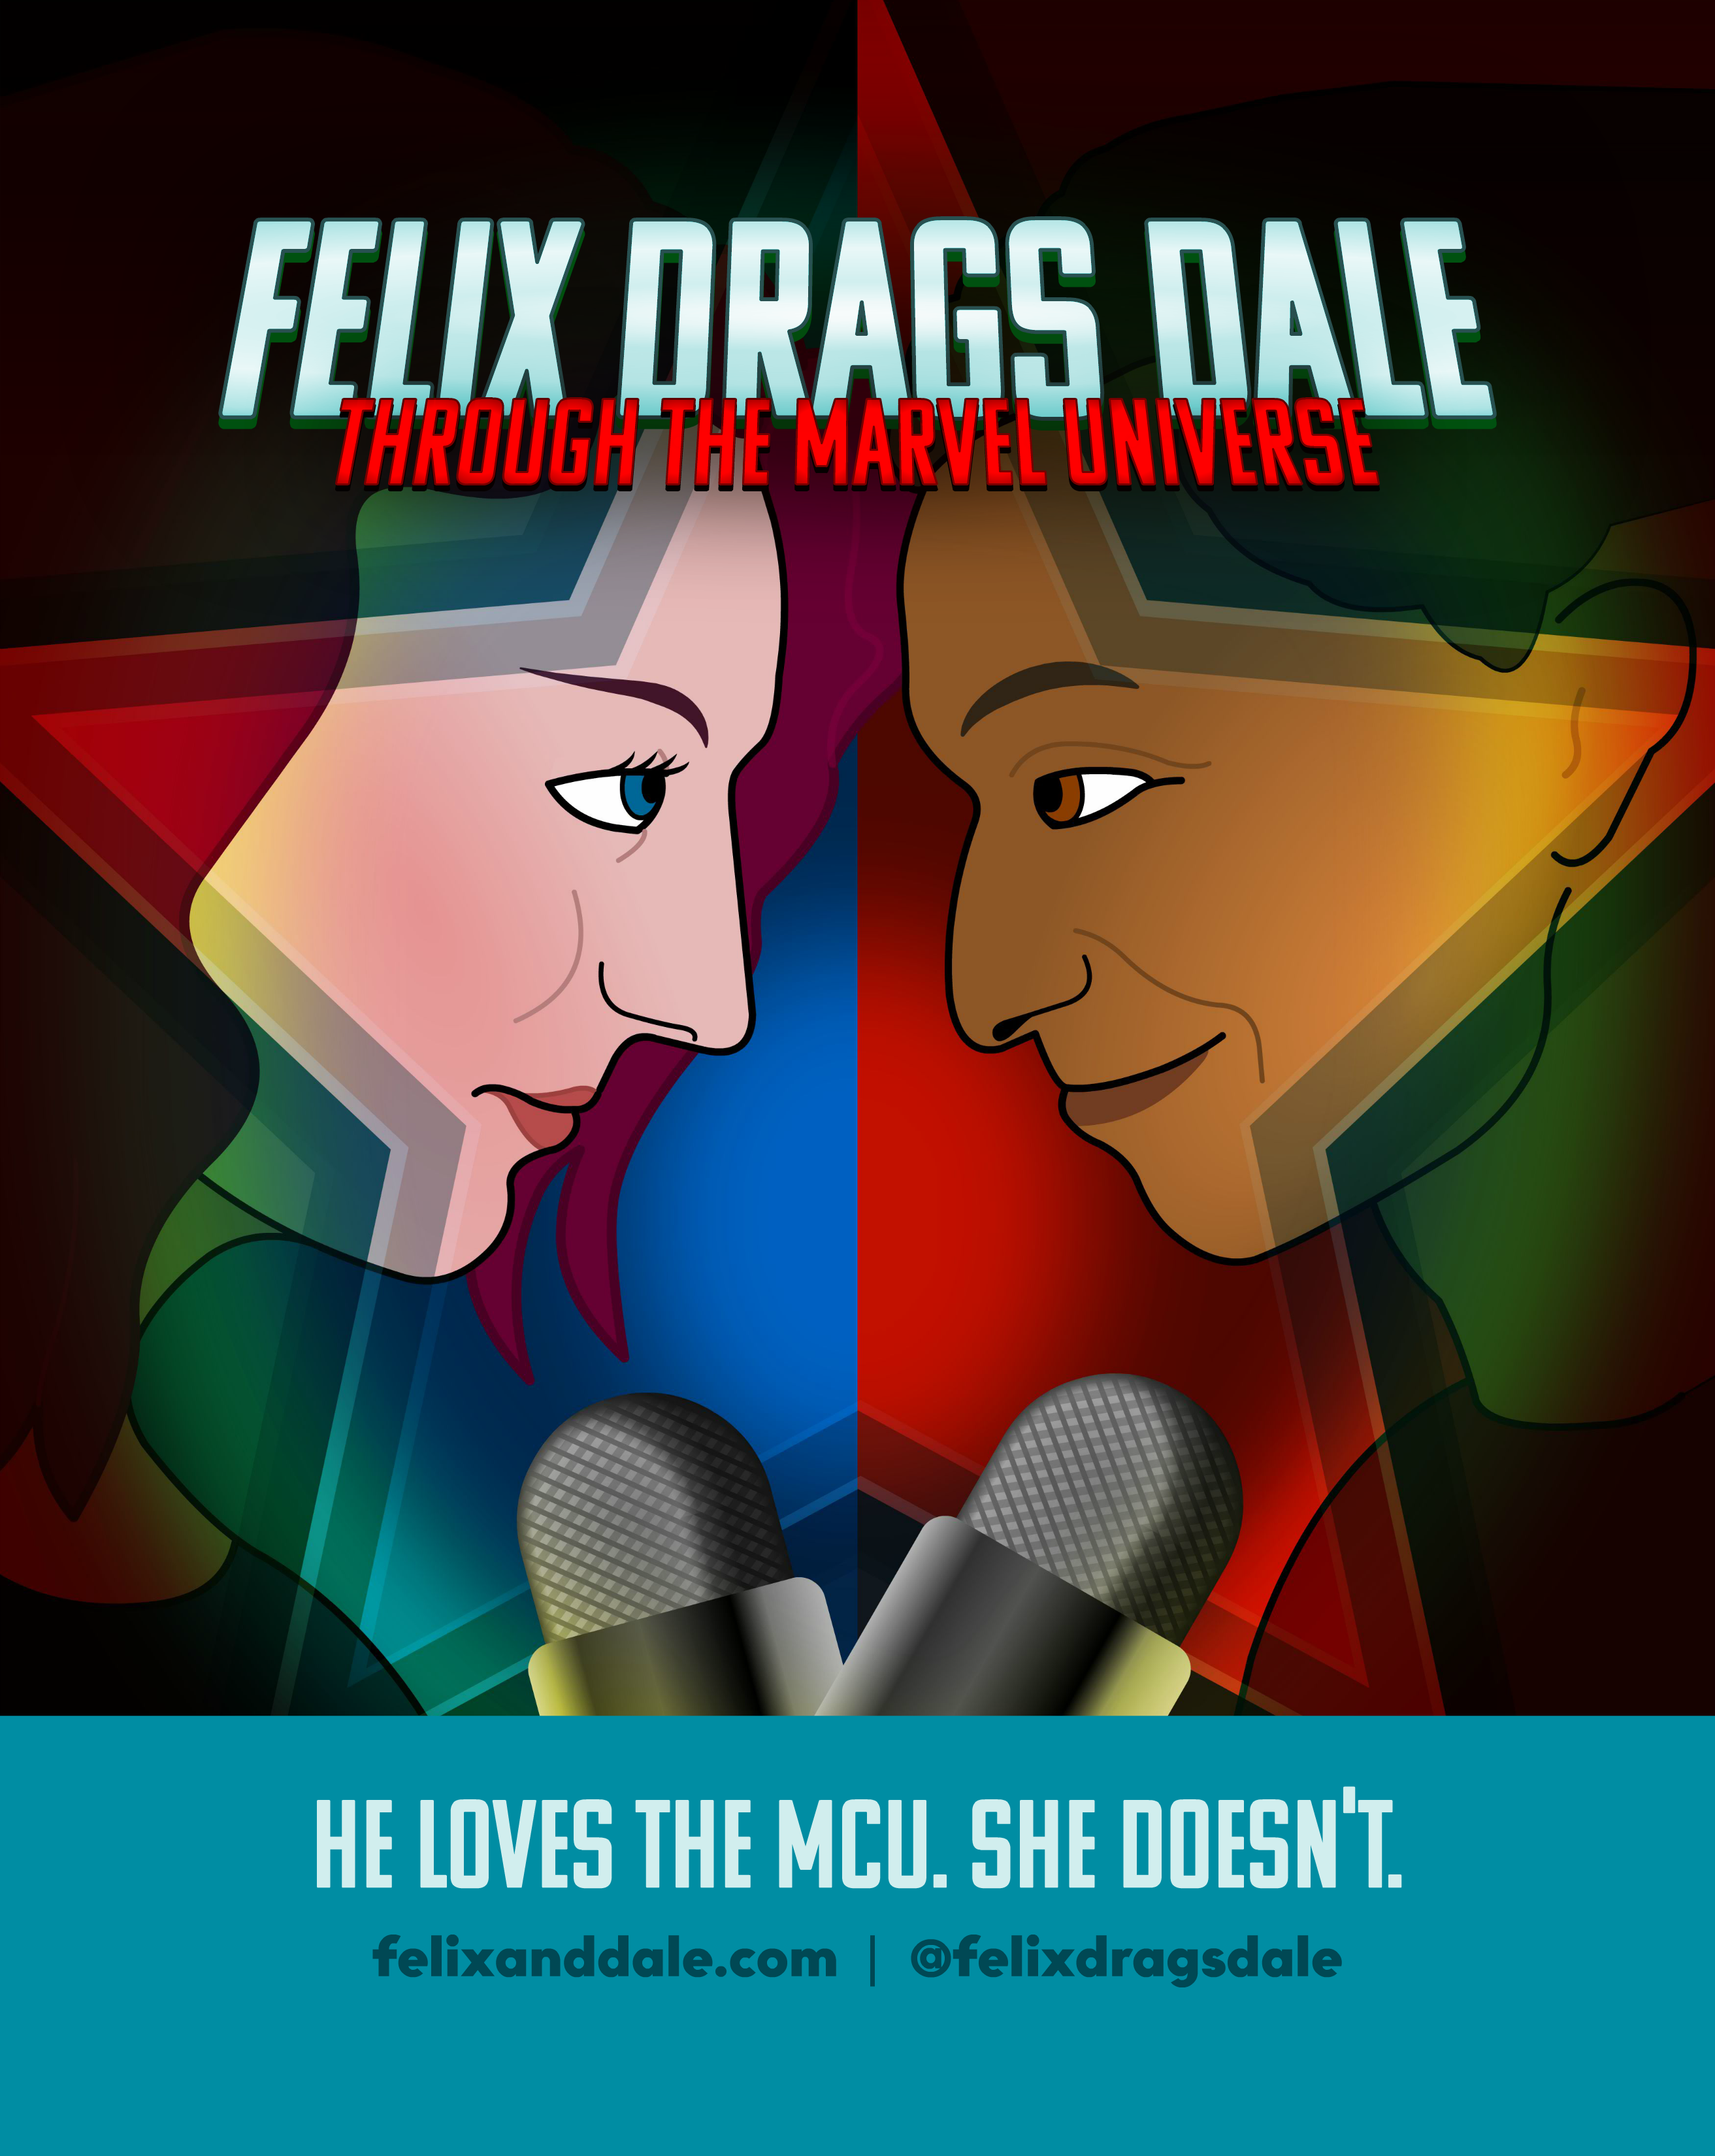 A flyer for Felix Drags Dale Though the Marvel Universe